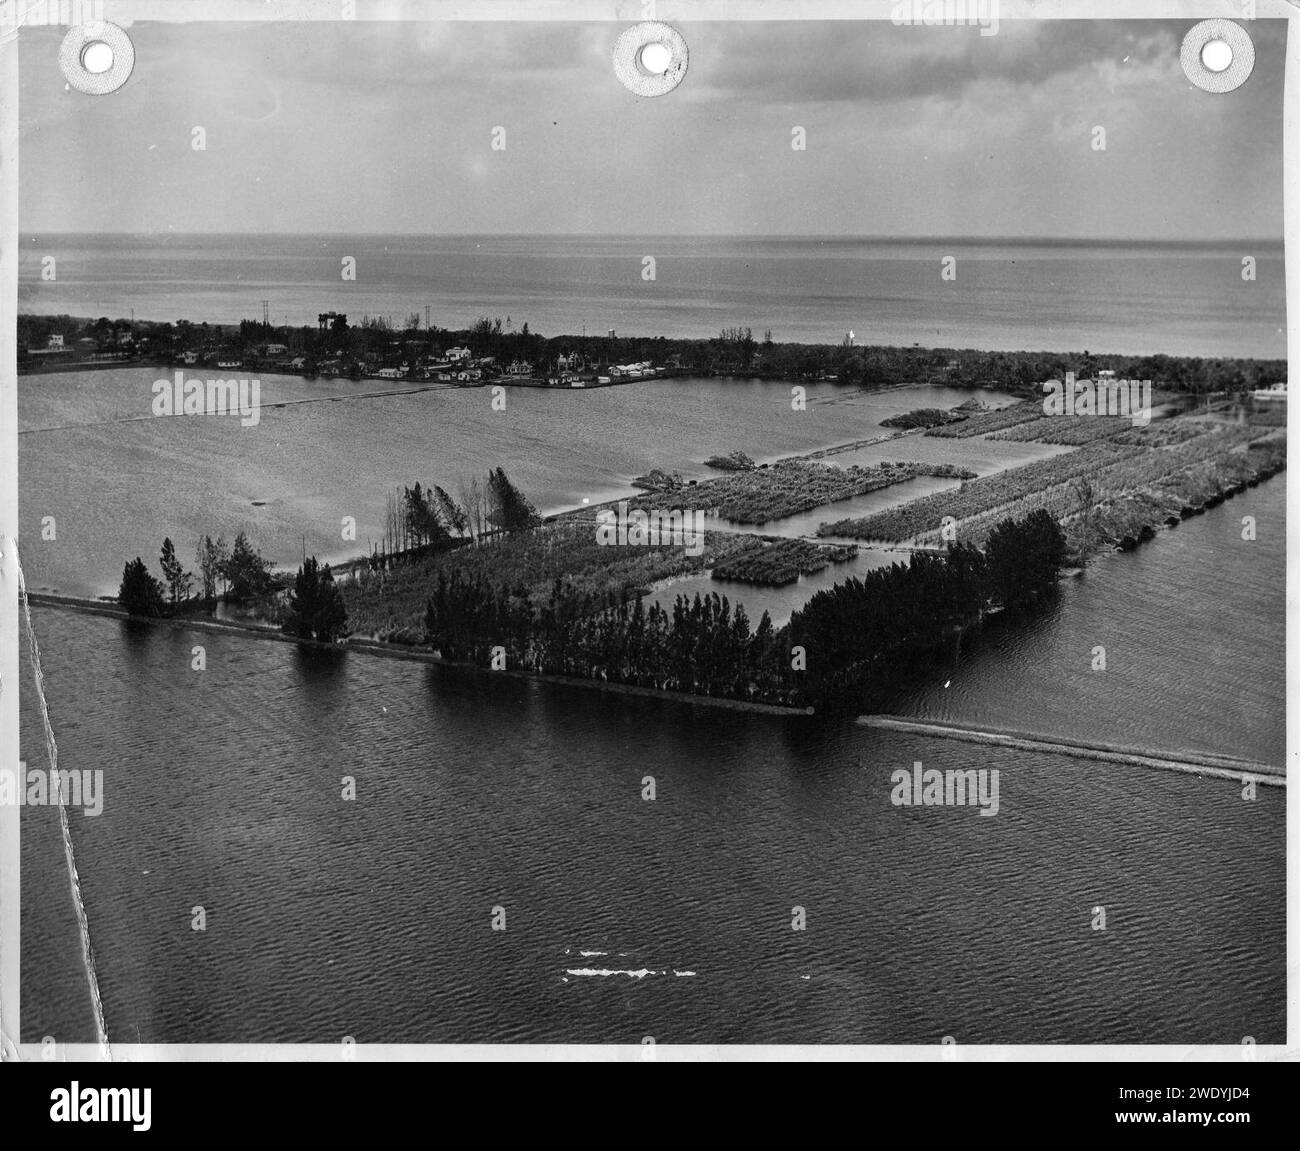 Aerial view of USDA Sugarcane Experiment Station, October 6, 1947. Stock Photo